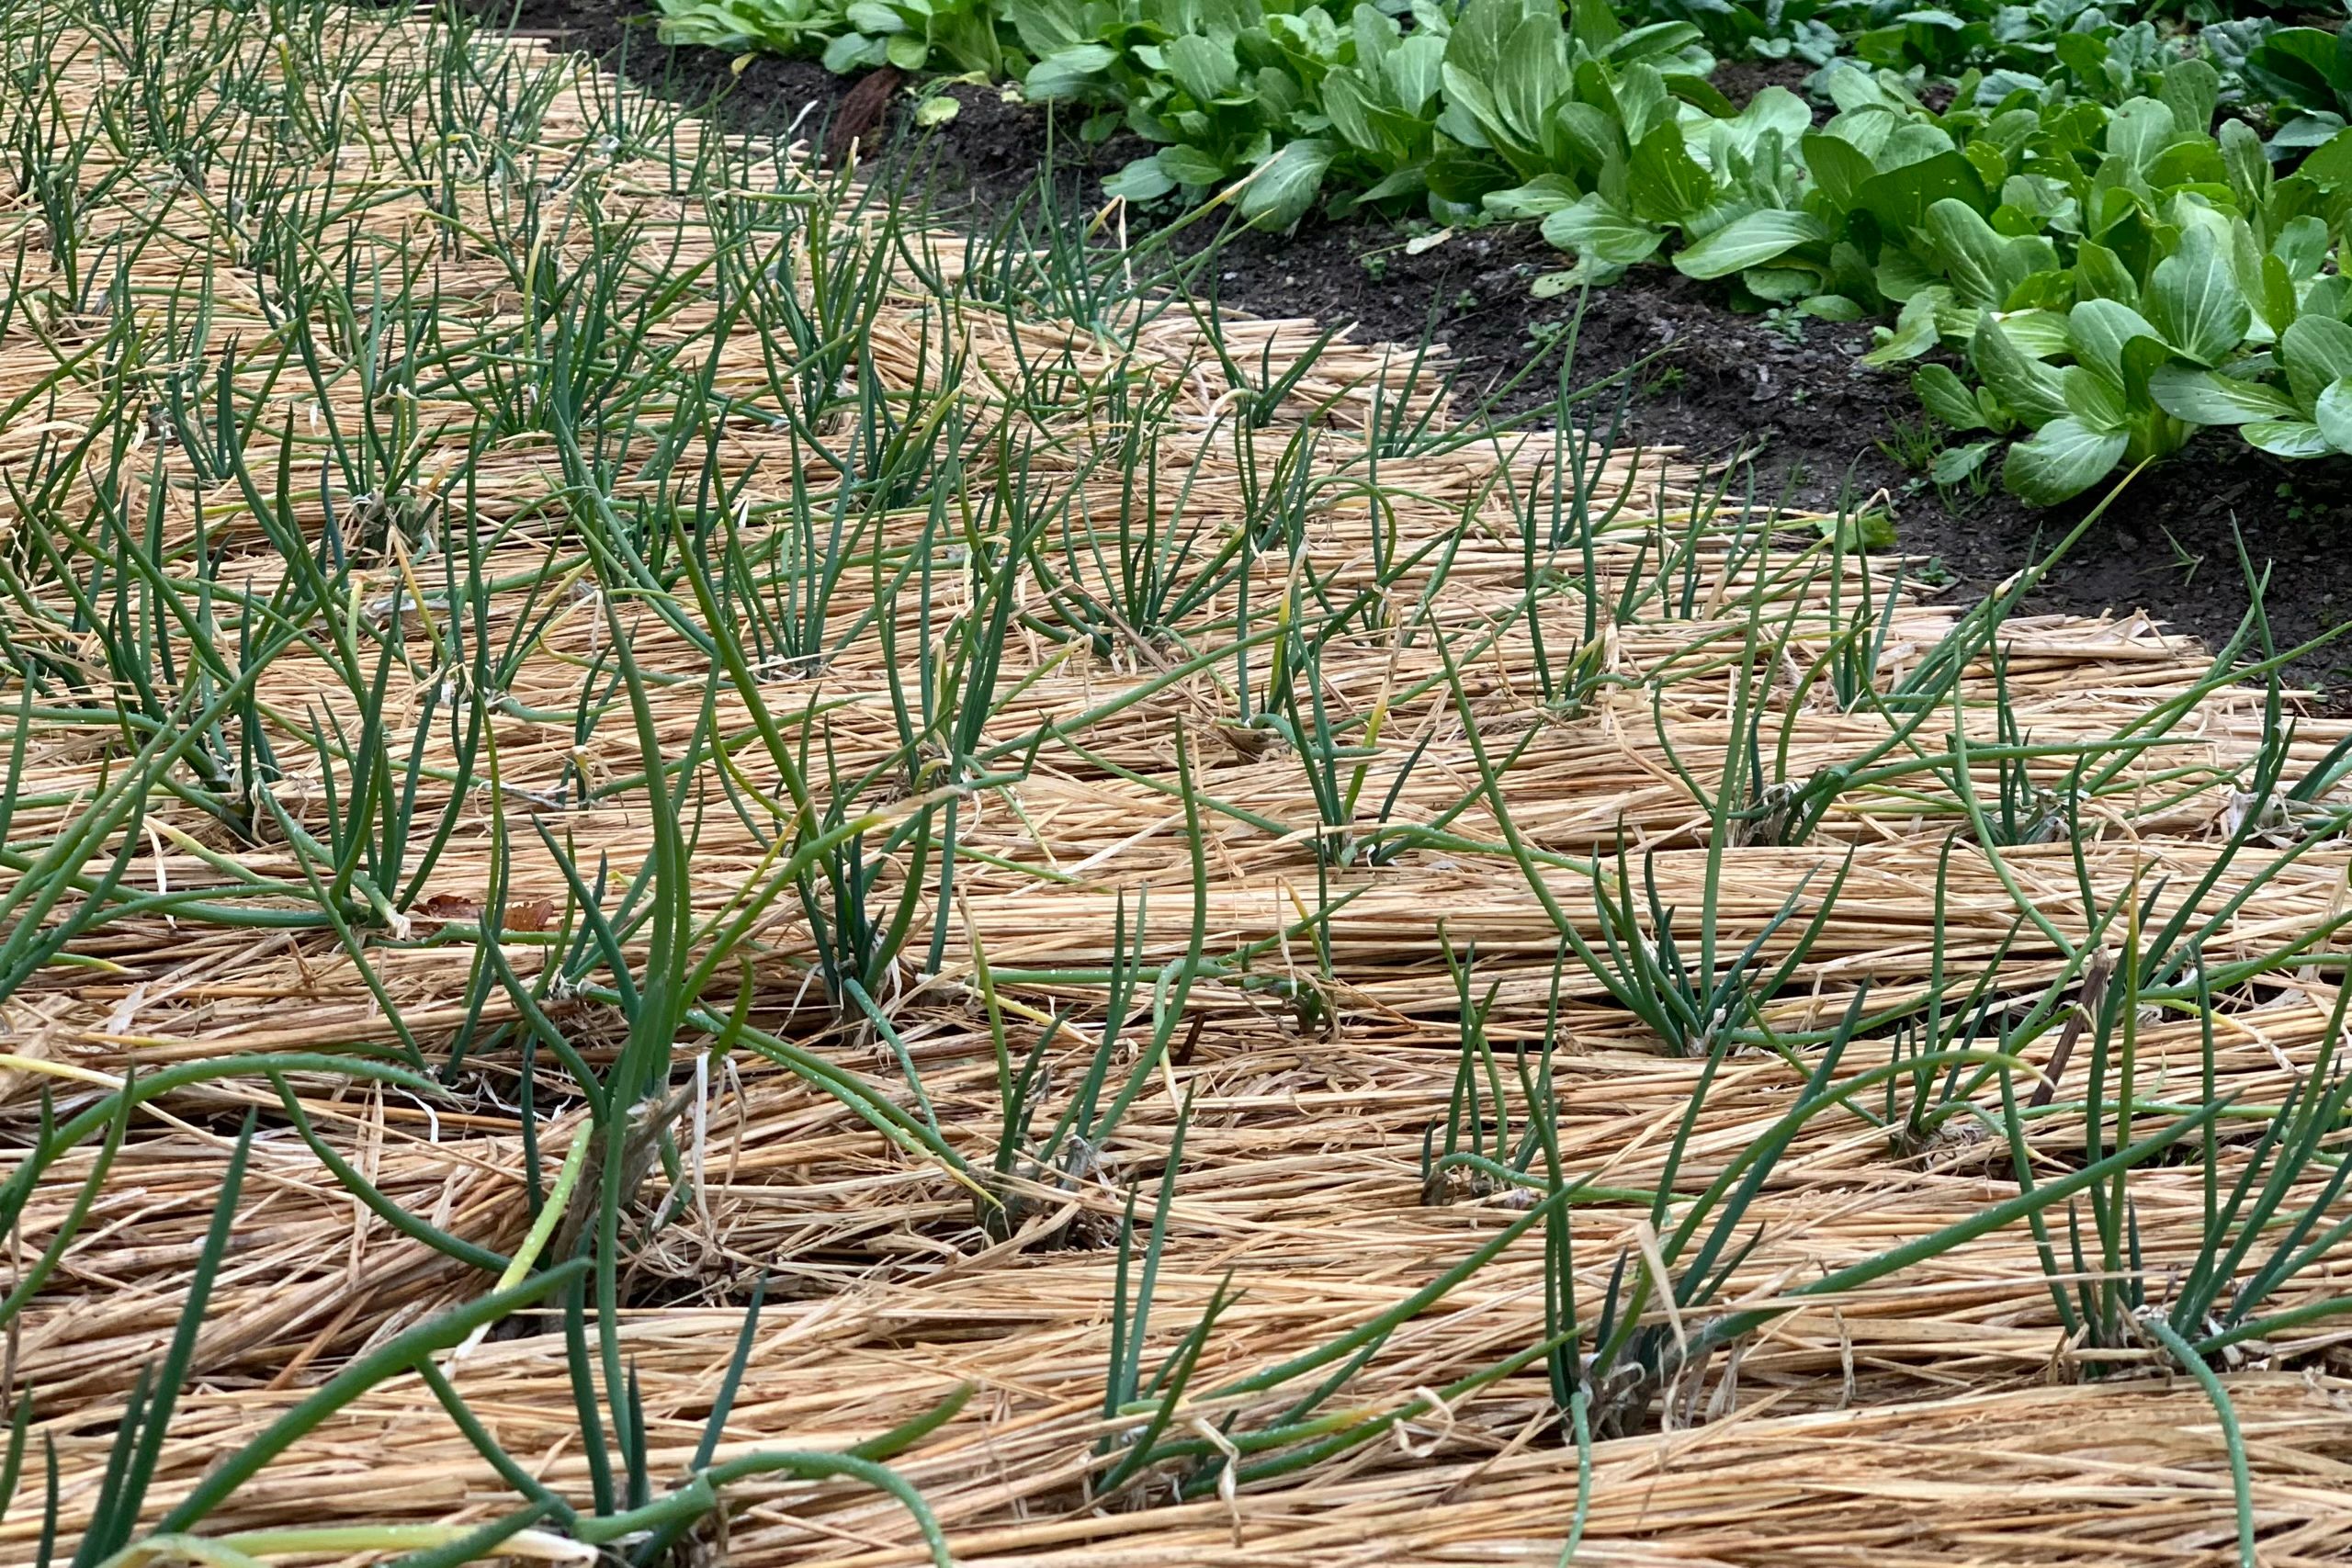 A garden of spring onions growing from a bed of straw.